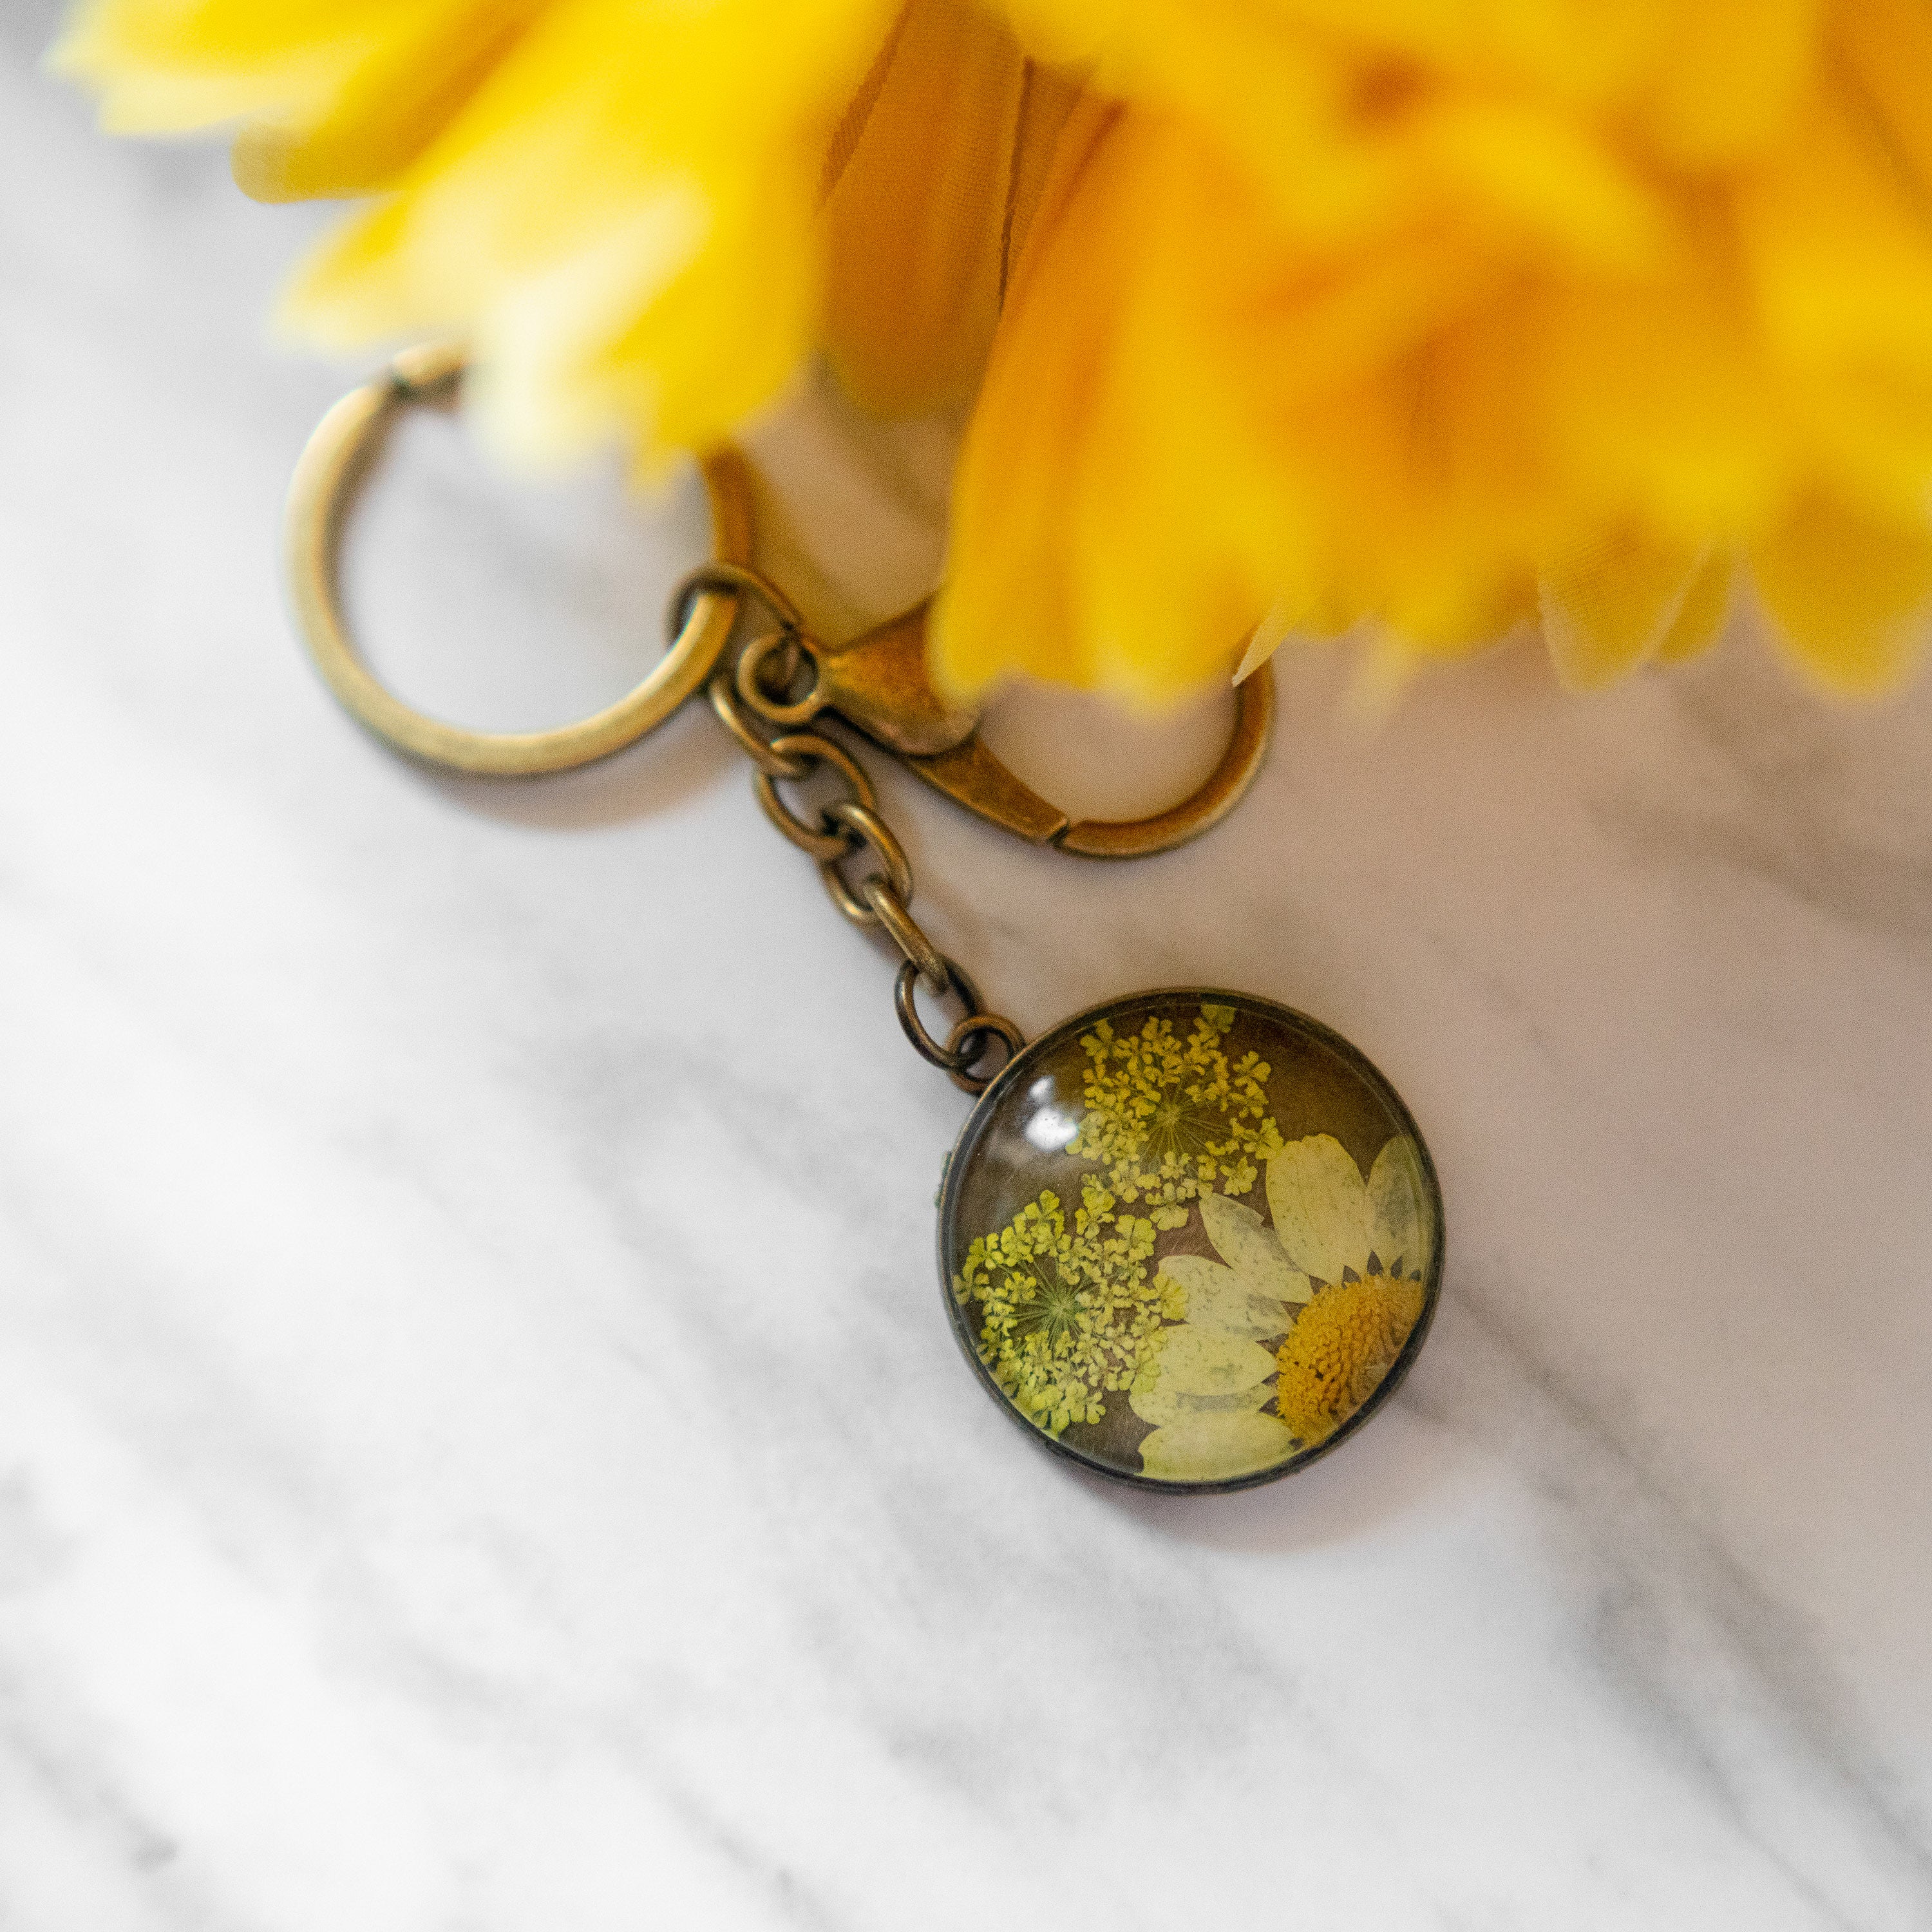 Real Pressed Flower Resin Keychain with Daisy and Lace Floral Neverland Floralfy 05